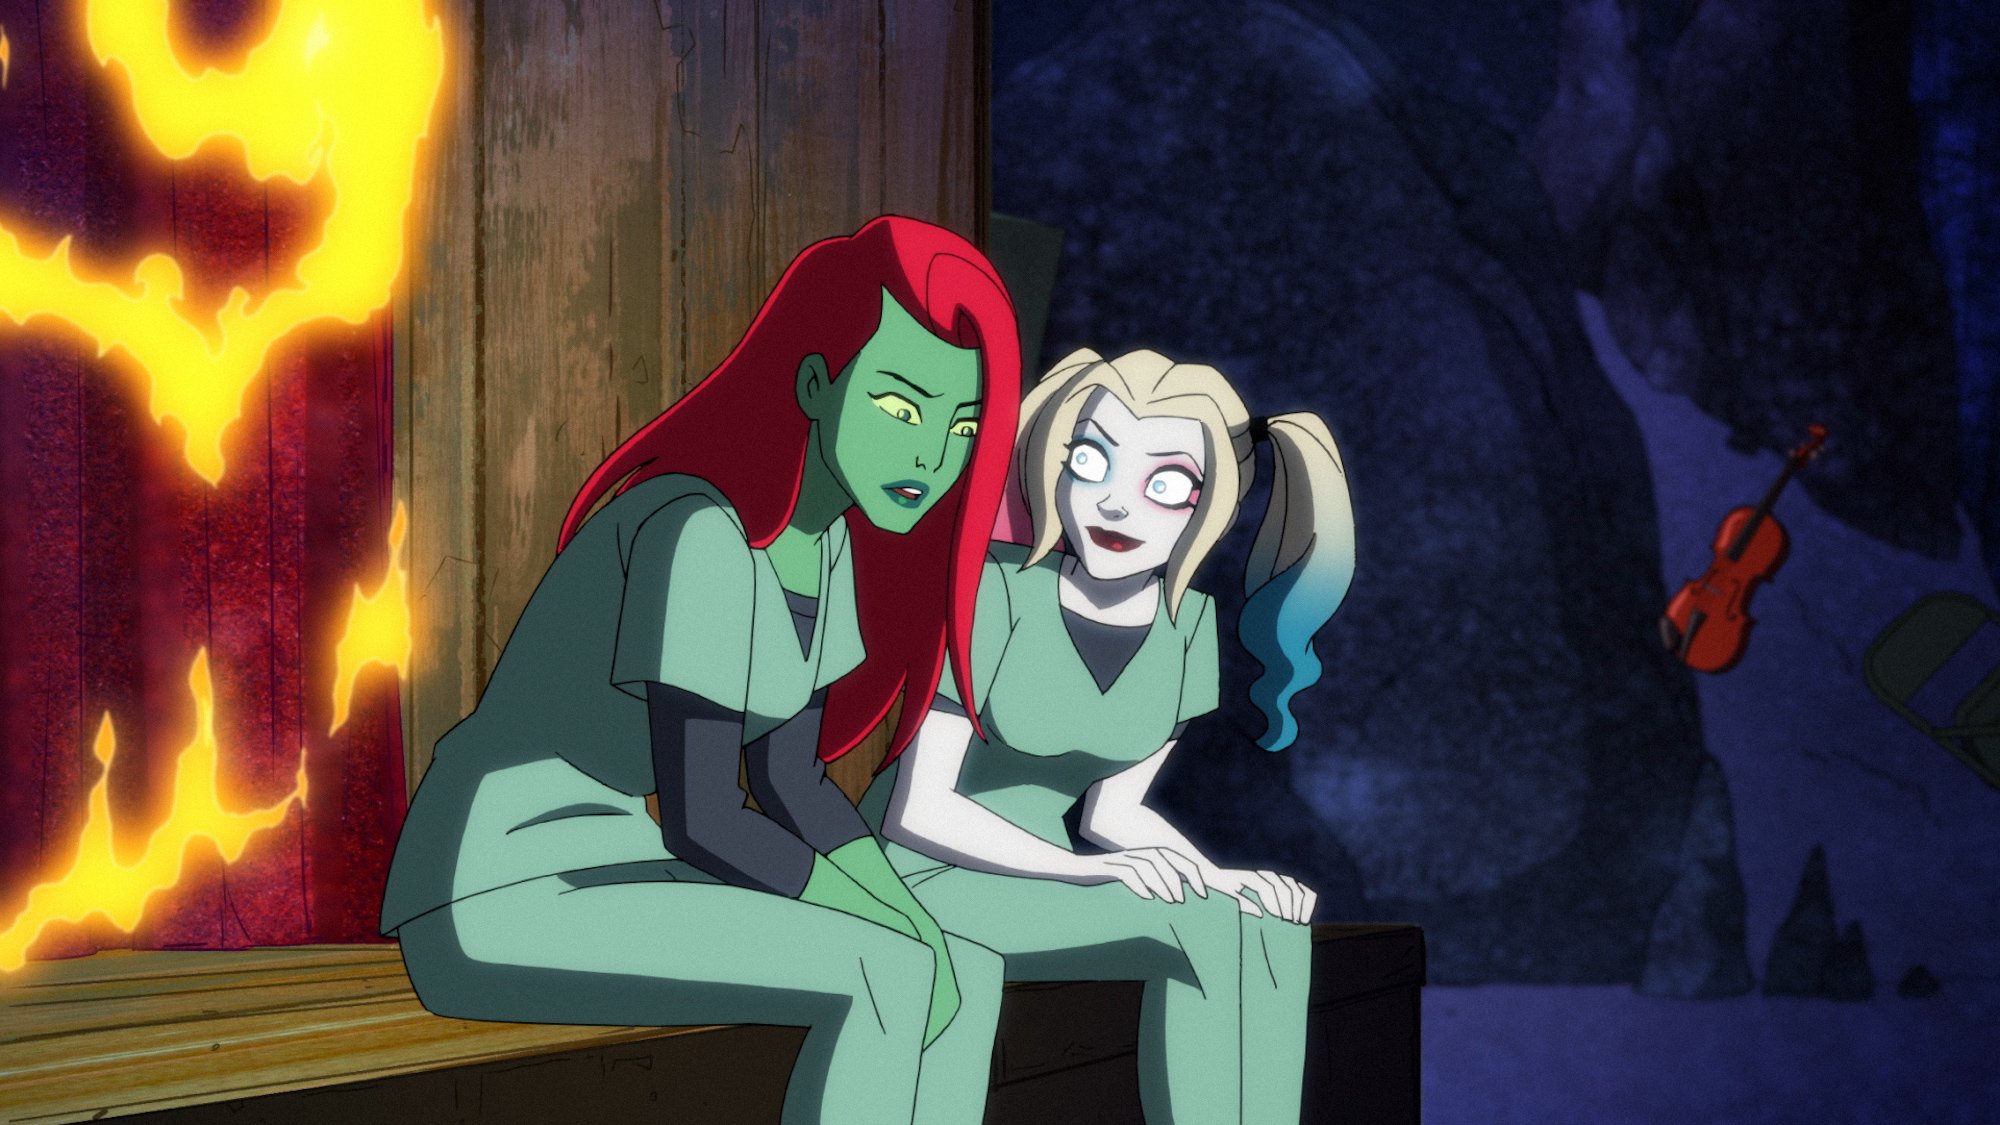 Poison Ivy and Harley Quinn talk in Bane's pit in Season 2, Episode 7.